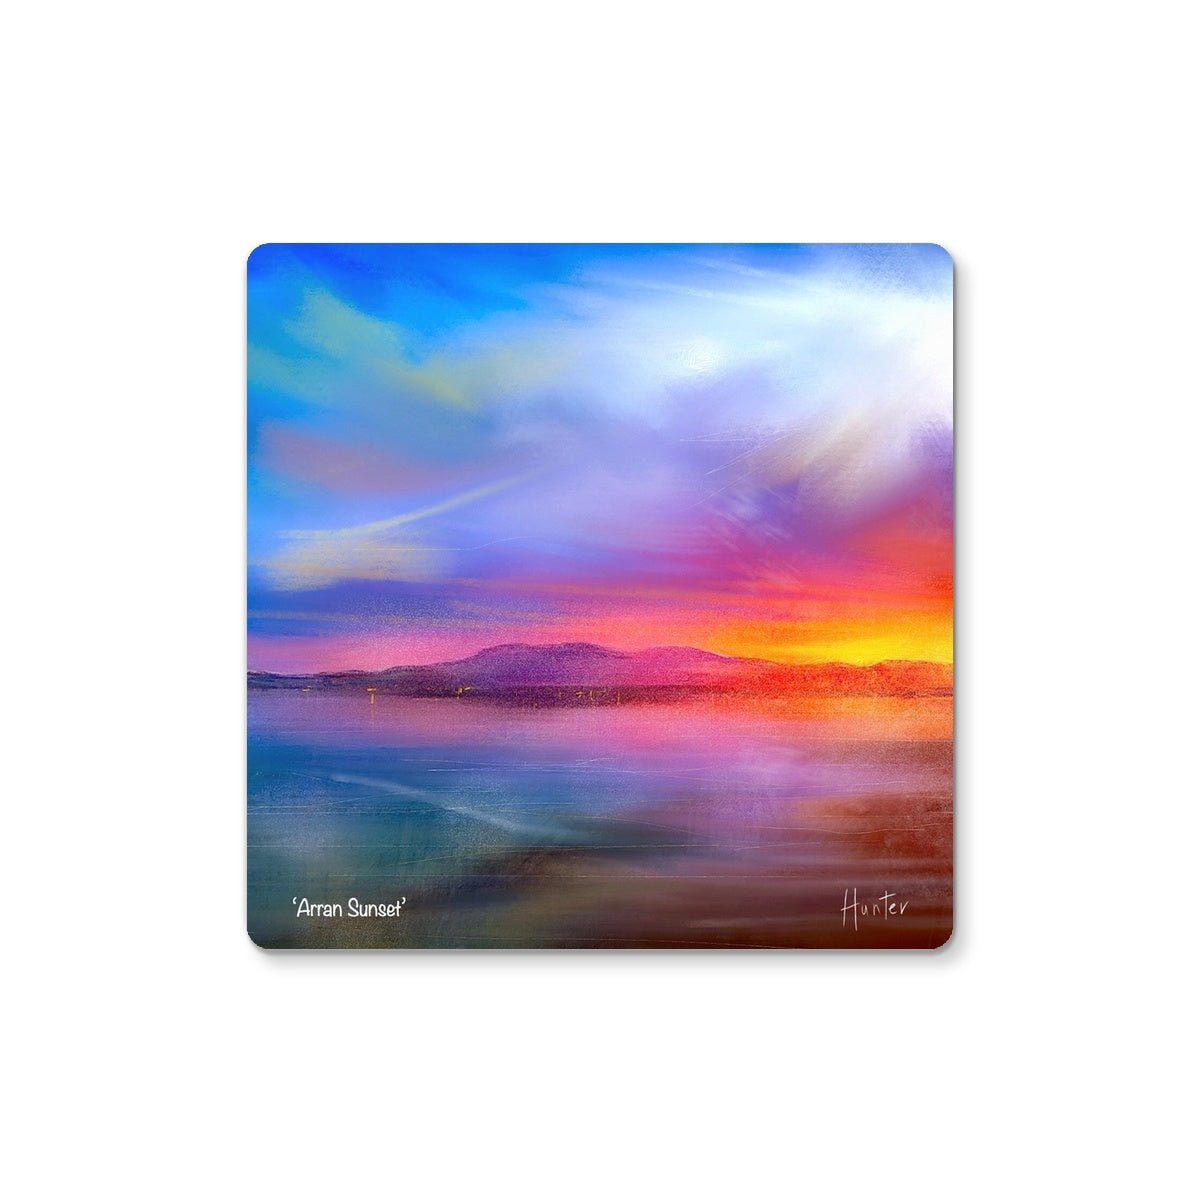 Arran Sunset Art Gifts Coaster-Coasters-Arran Art Gallery-2 Coasters-Paintings, Prints, Homeware, Art Gifts From Scotland By Scottish Artist Kevin Hunter